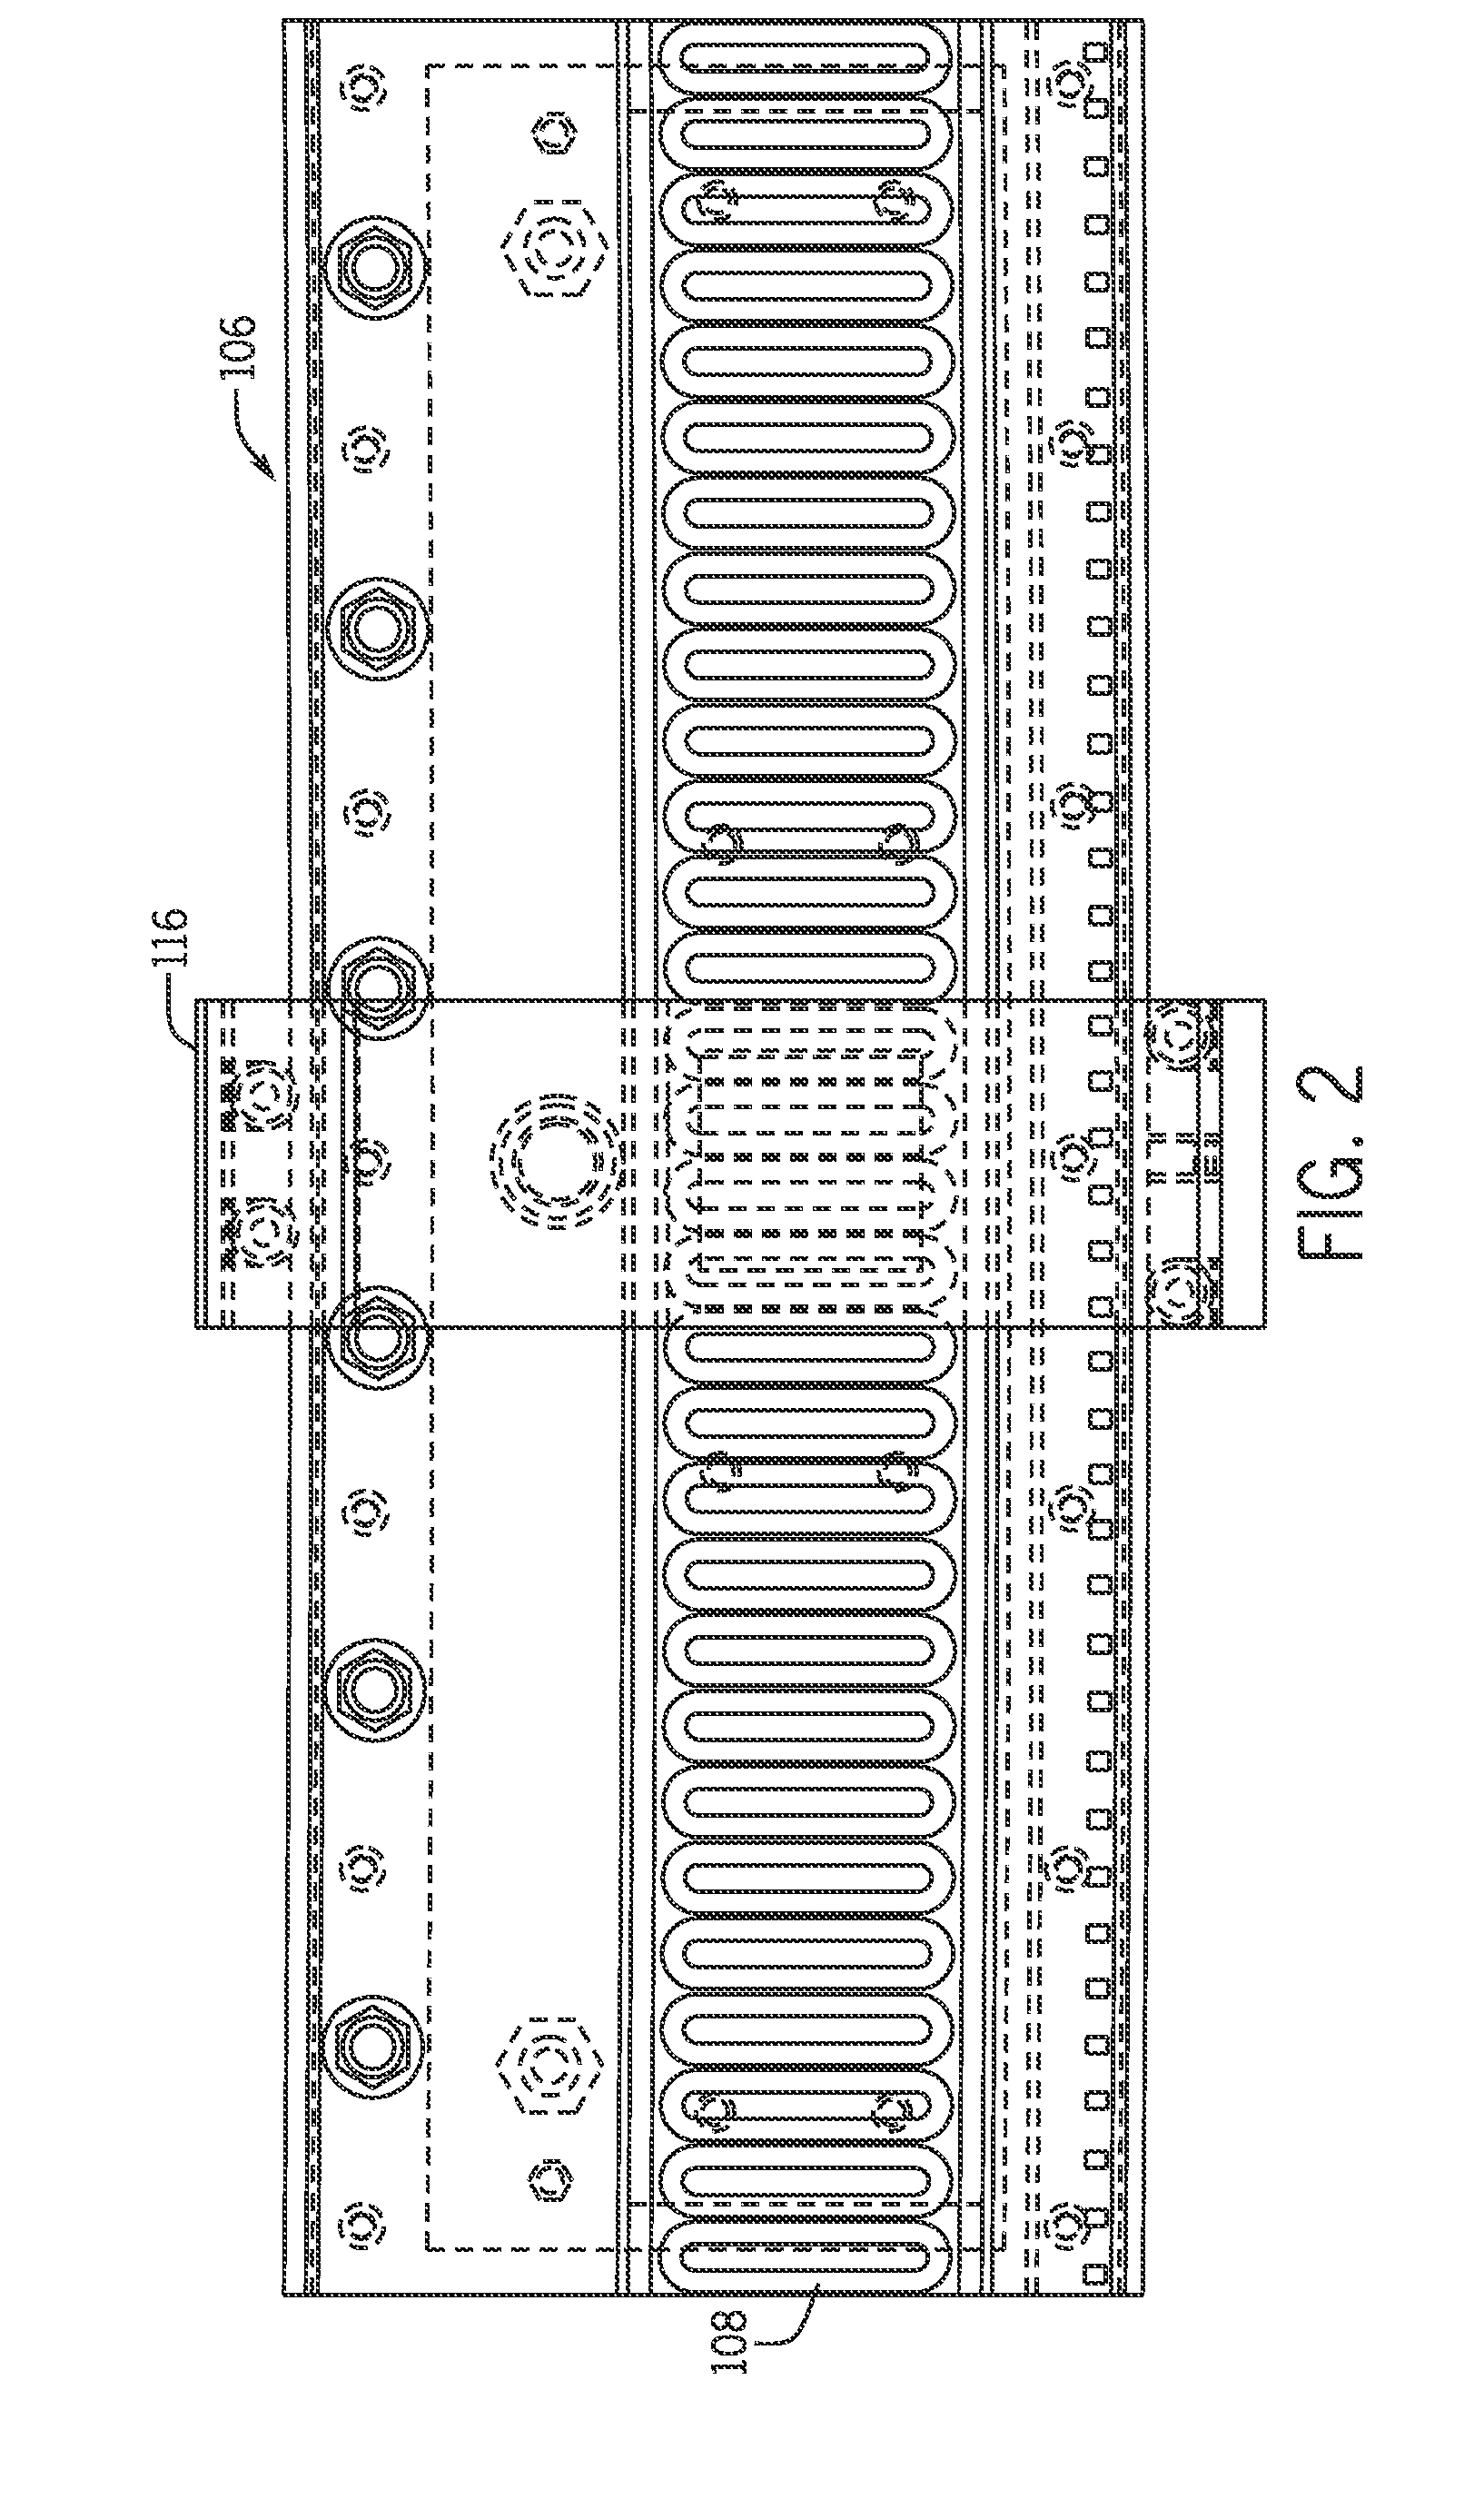 Controlled motion system having a magnetic flux bridge joining linear motor sections